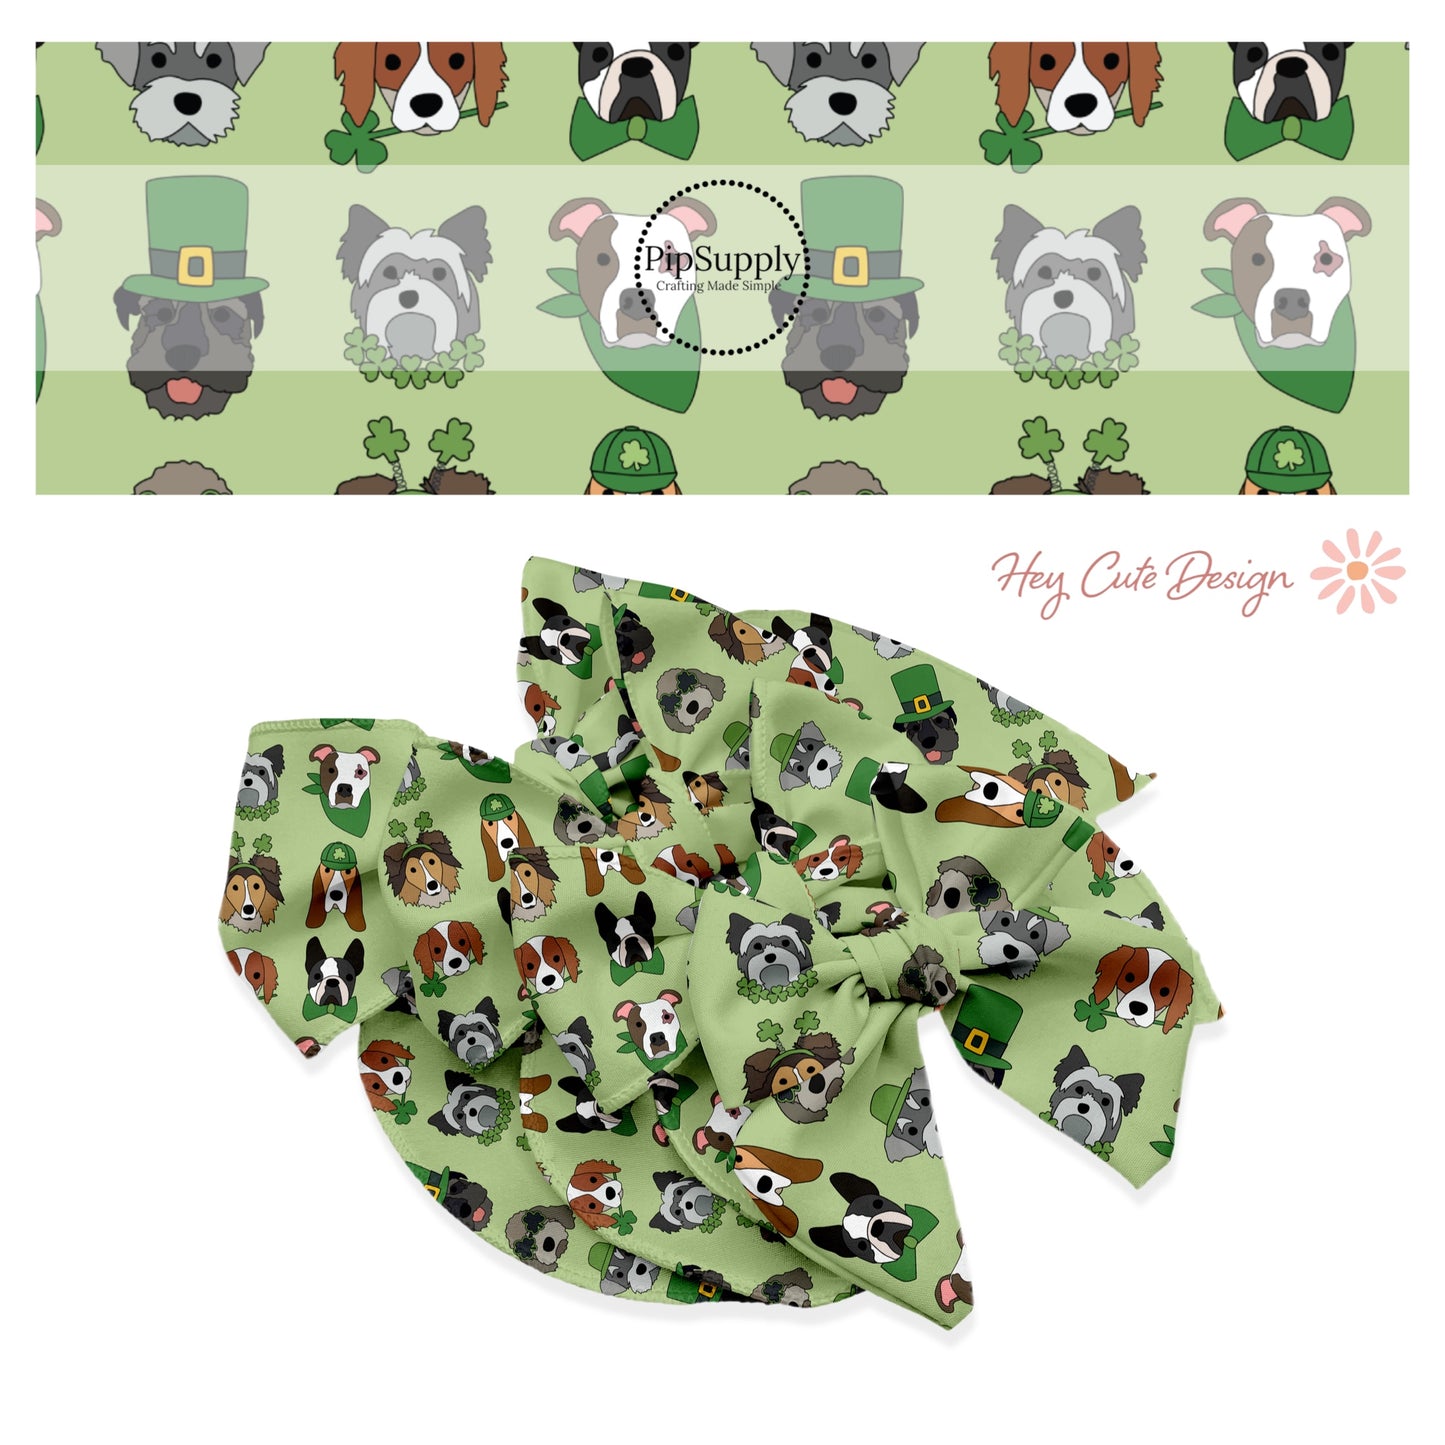 Puppies with green hats, clover headband, green bandana, and clover collar on a green bow strip